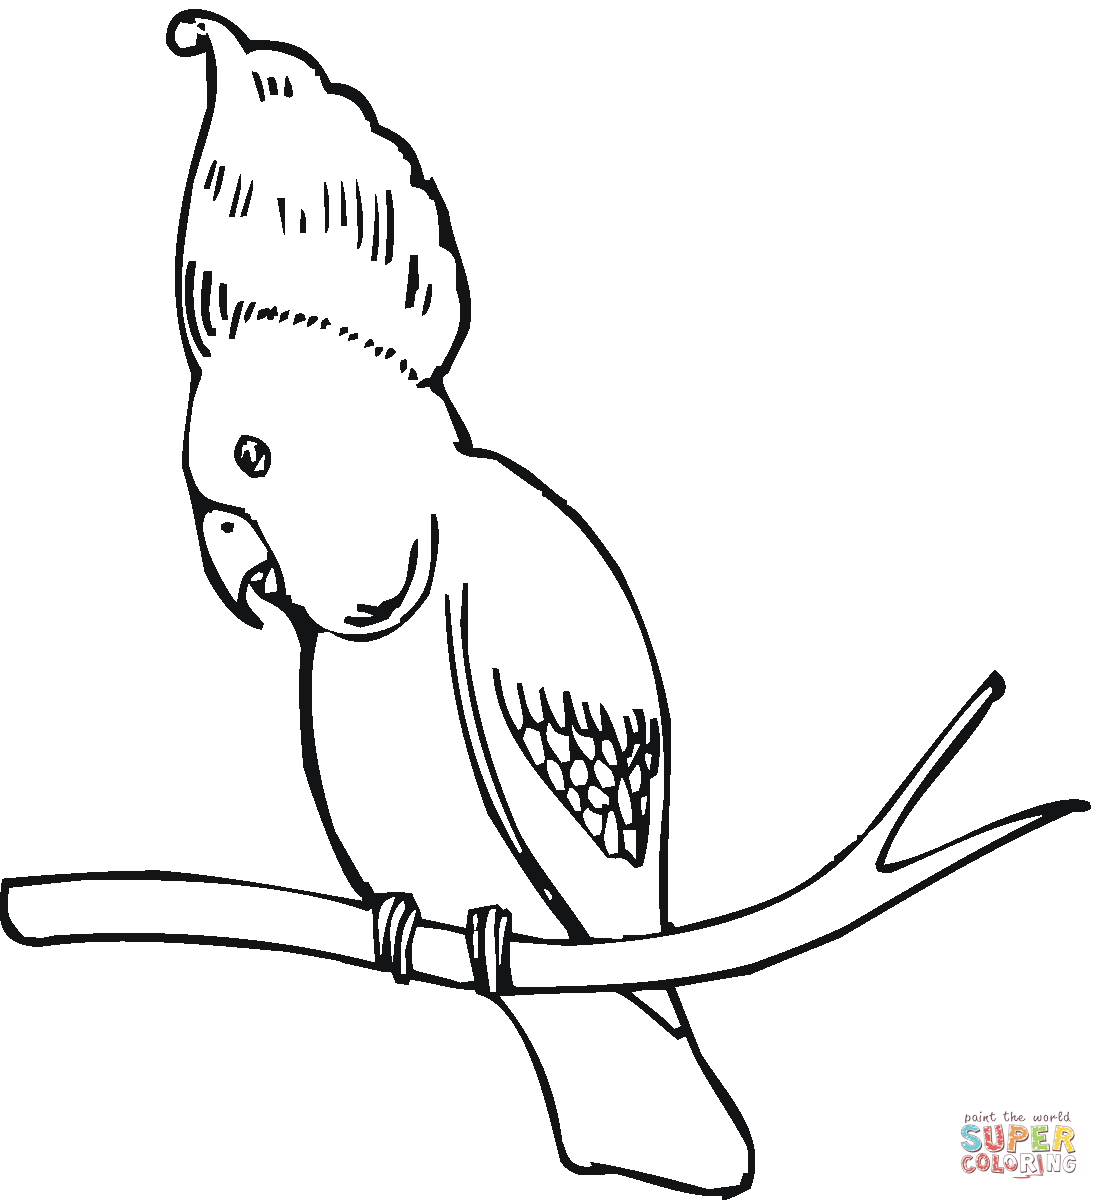 Sulphur-crested Cockatoo coloring #16, Download drawings